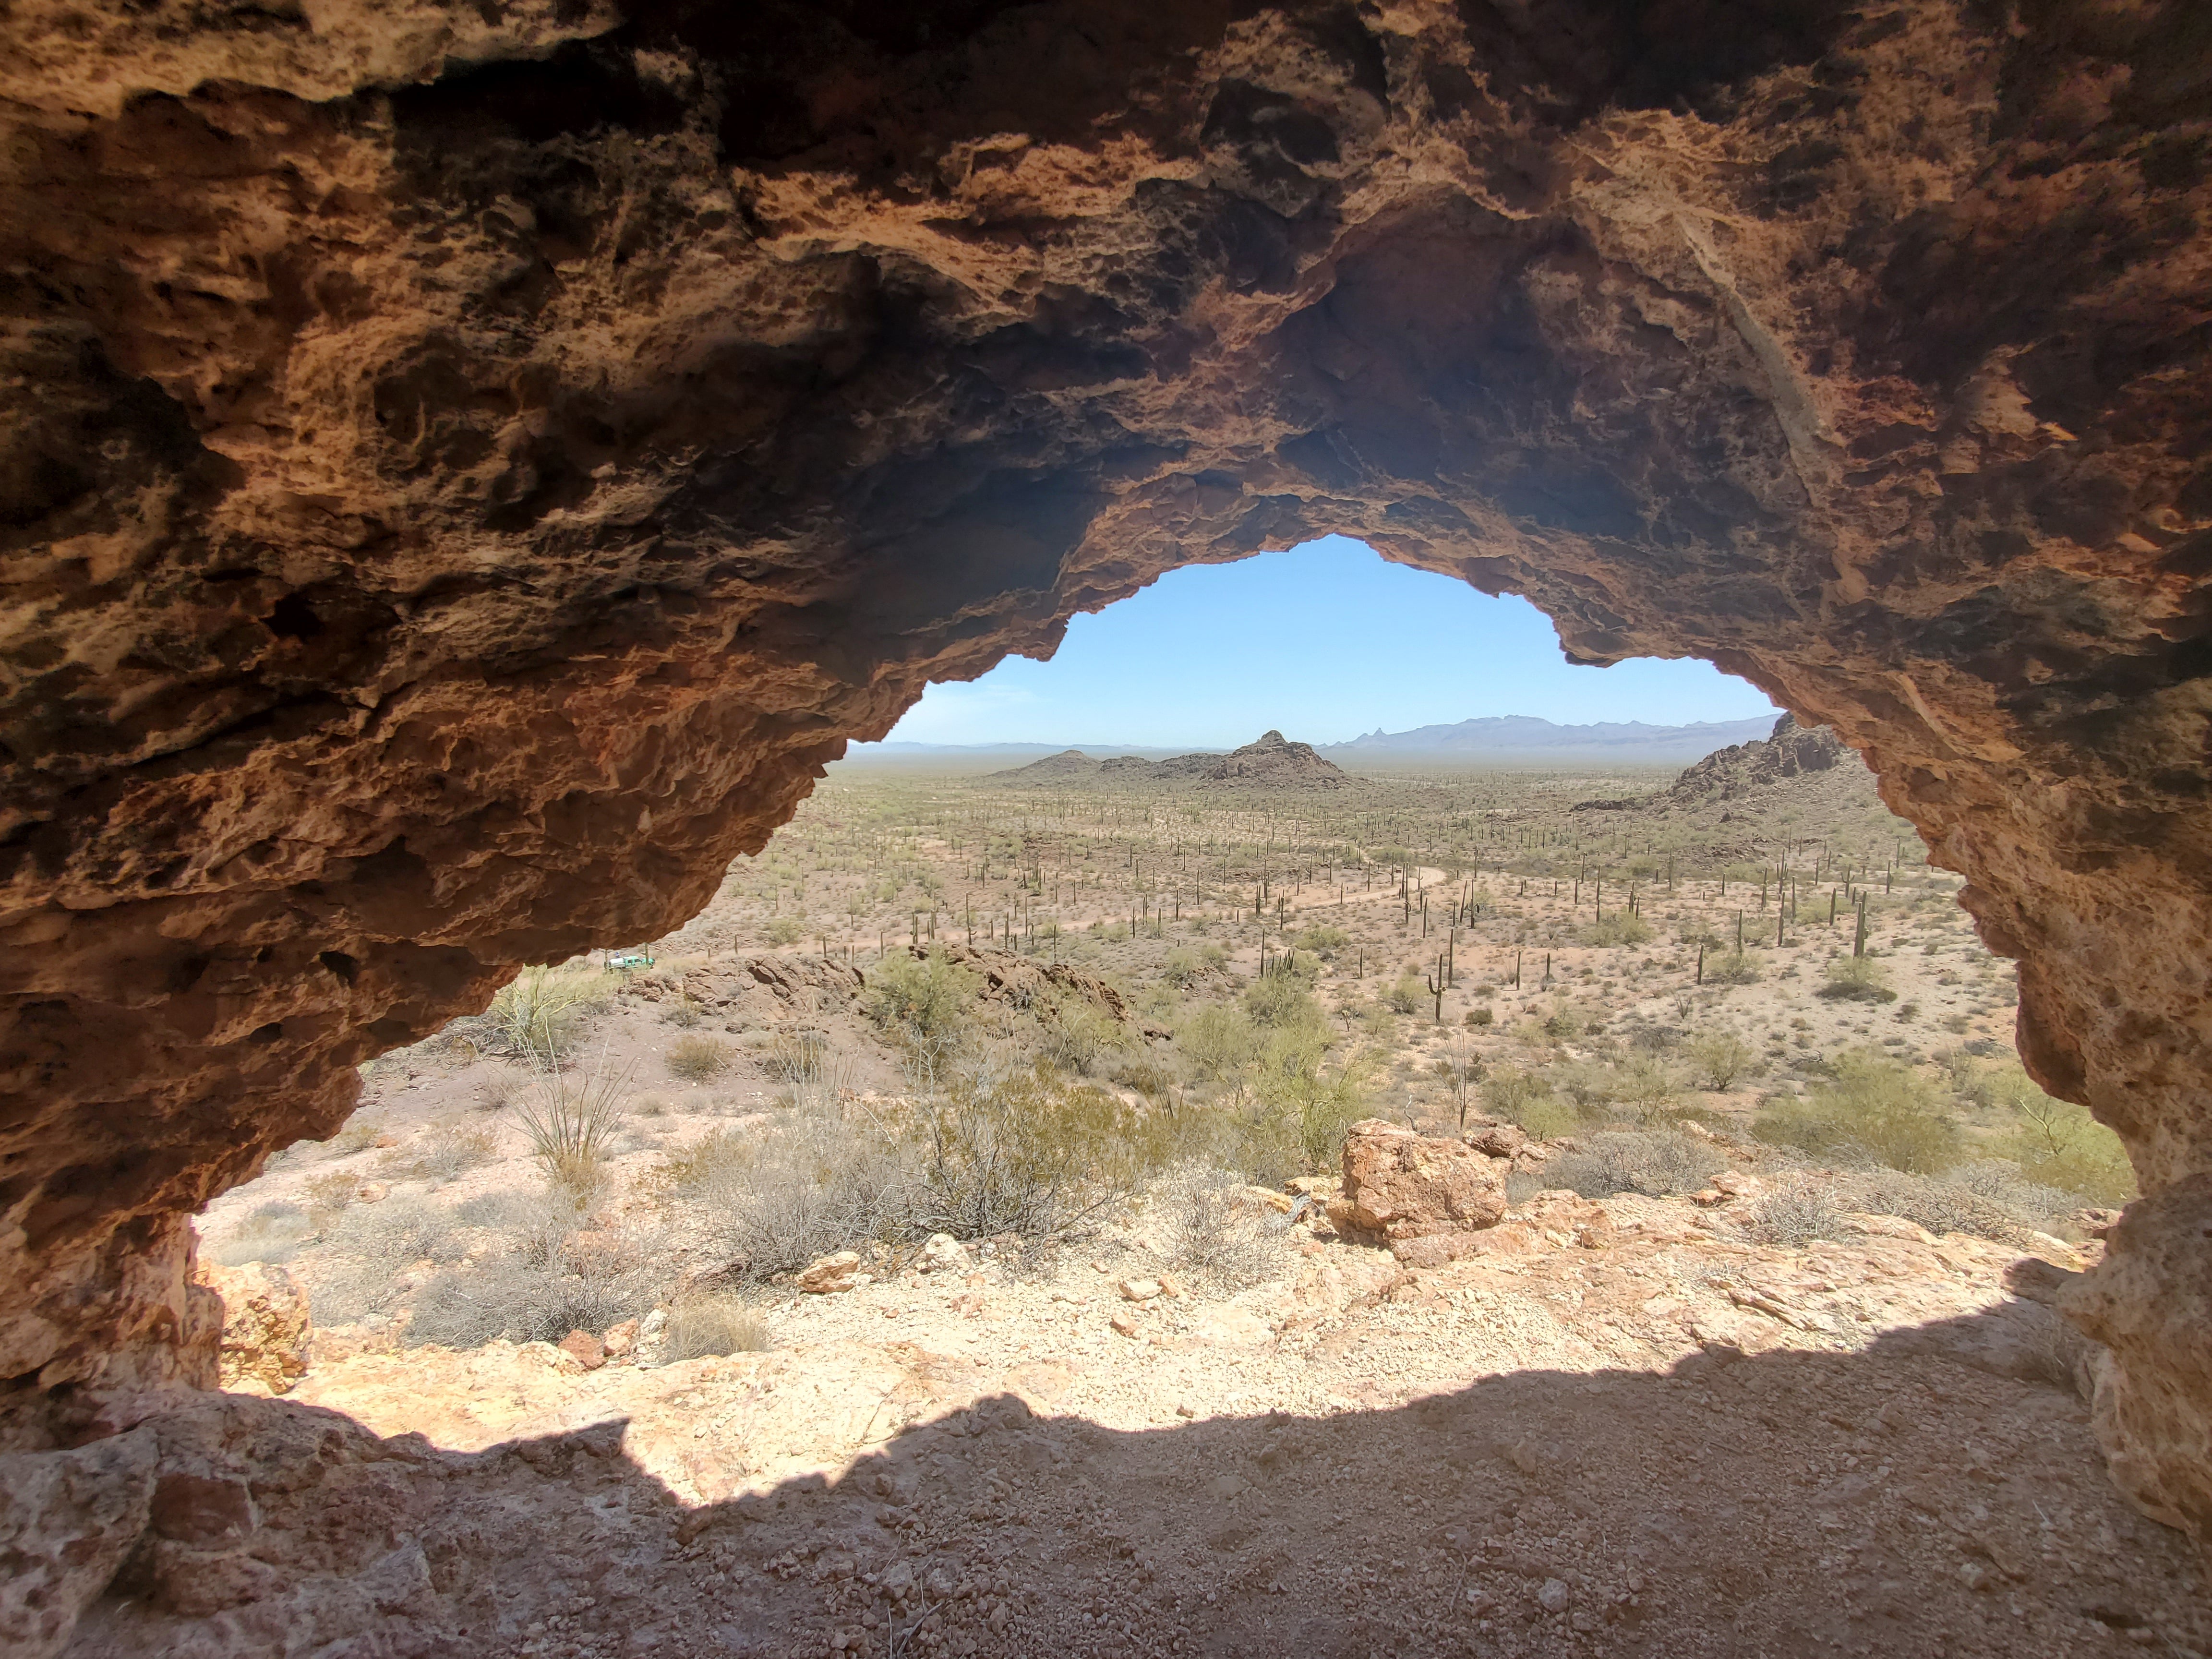 Image from inside a cave, overlooking a water-drop site in the Sonoran Desert